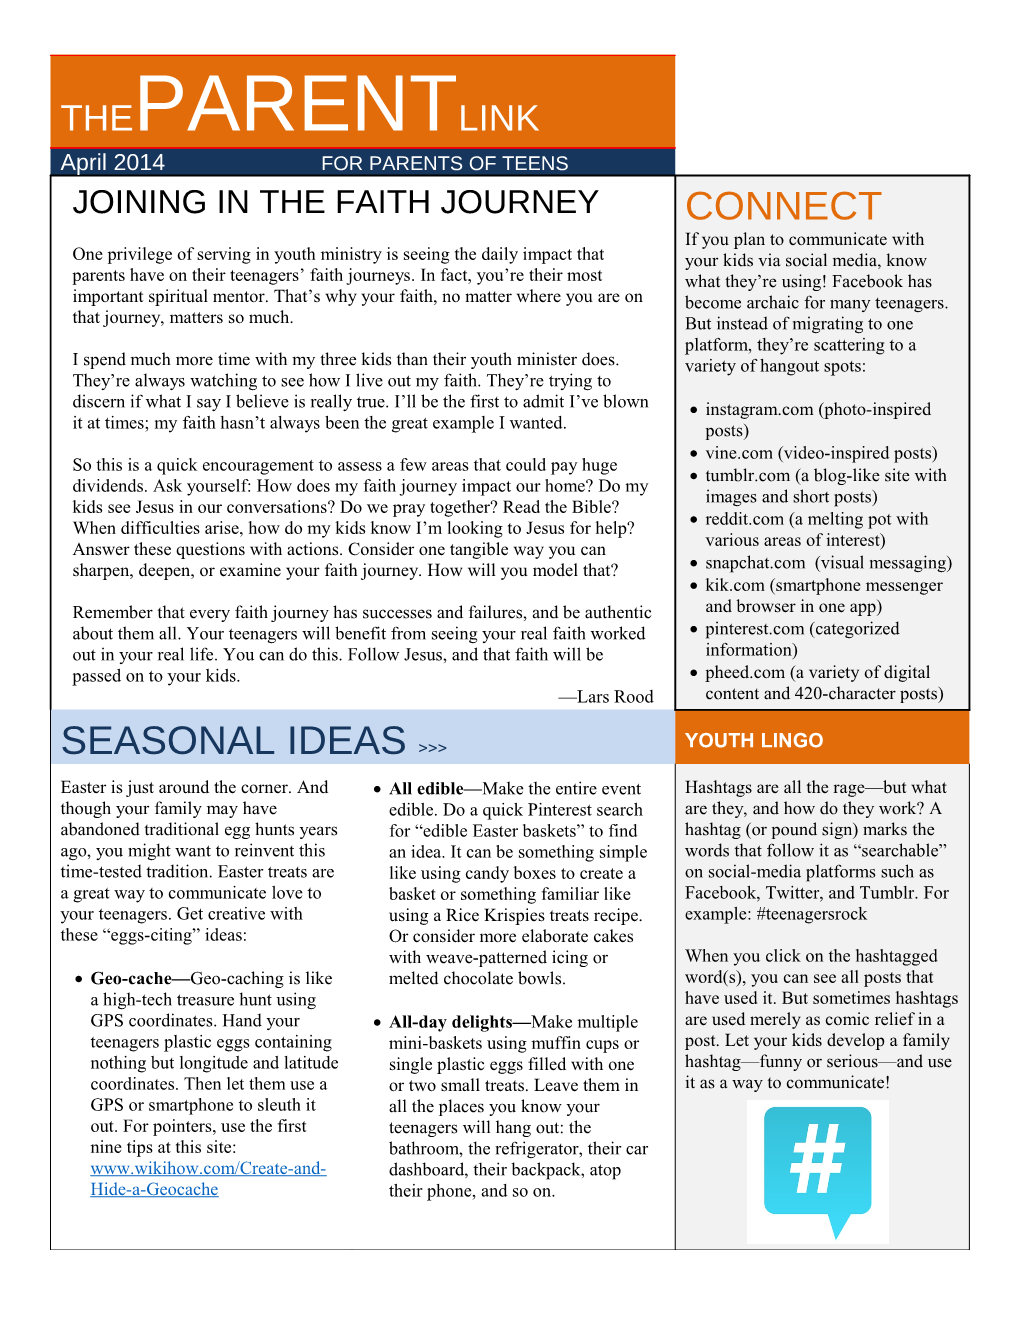 Joining in the Faith Journey